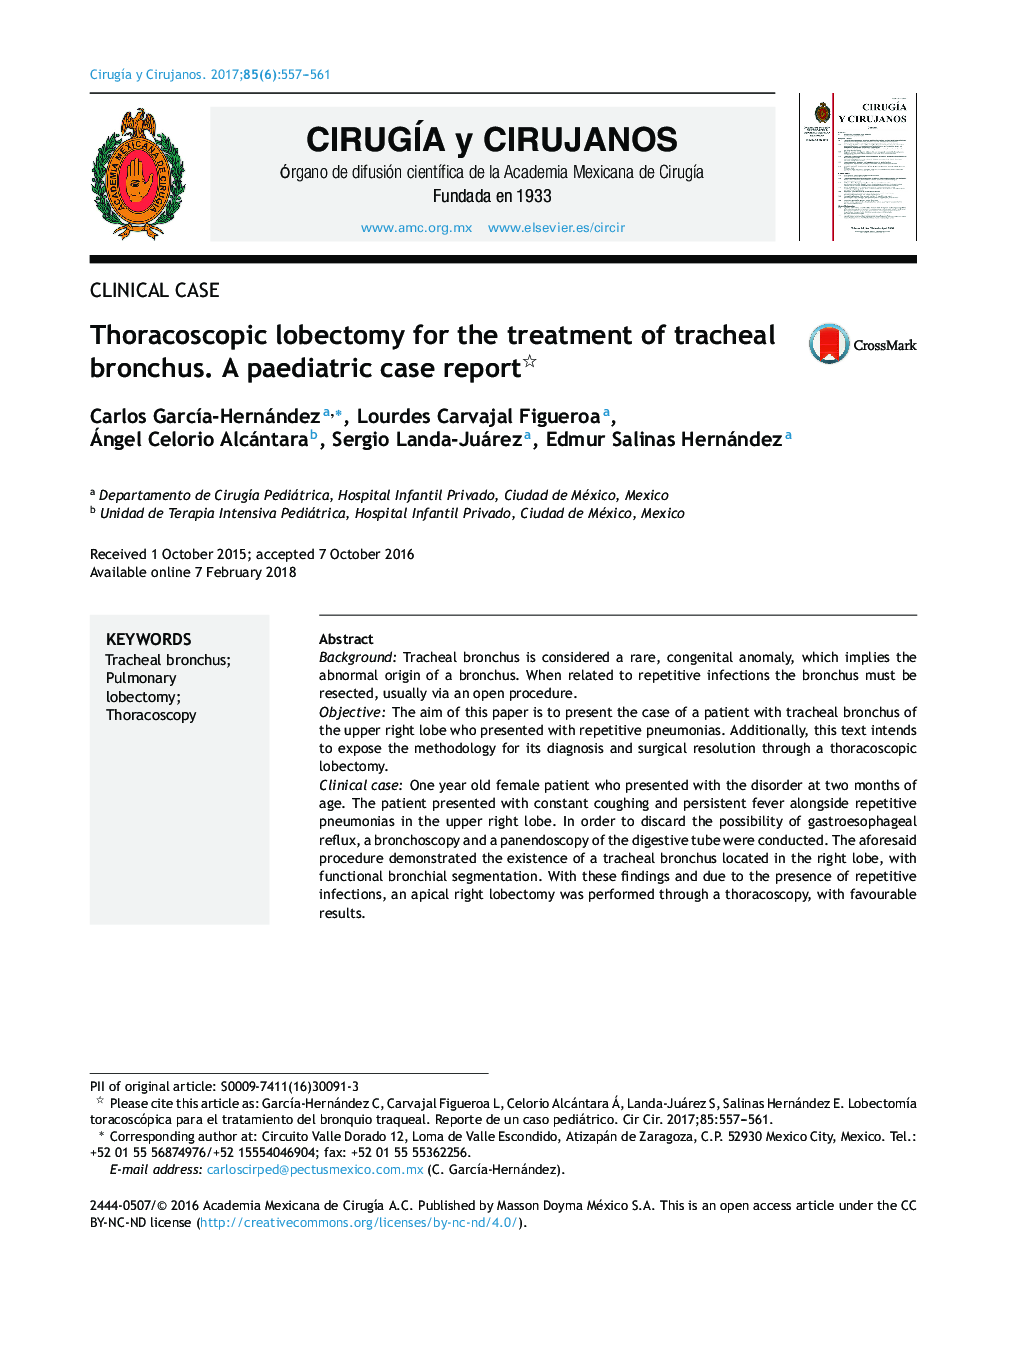 Thoracoscopic lobectomy for the treatment of tracheal bronchus. A paediatric case report